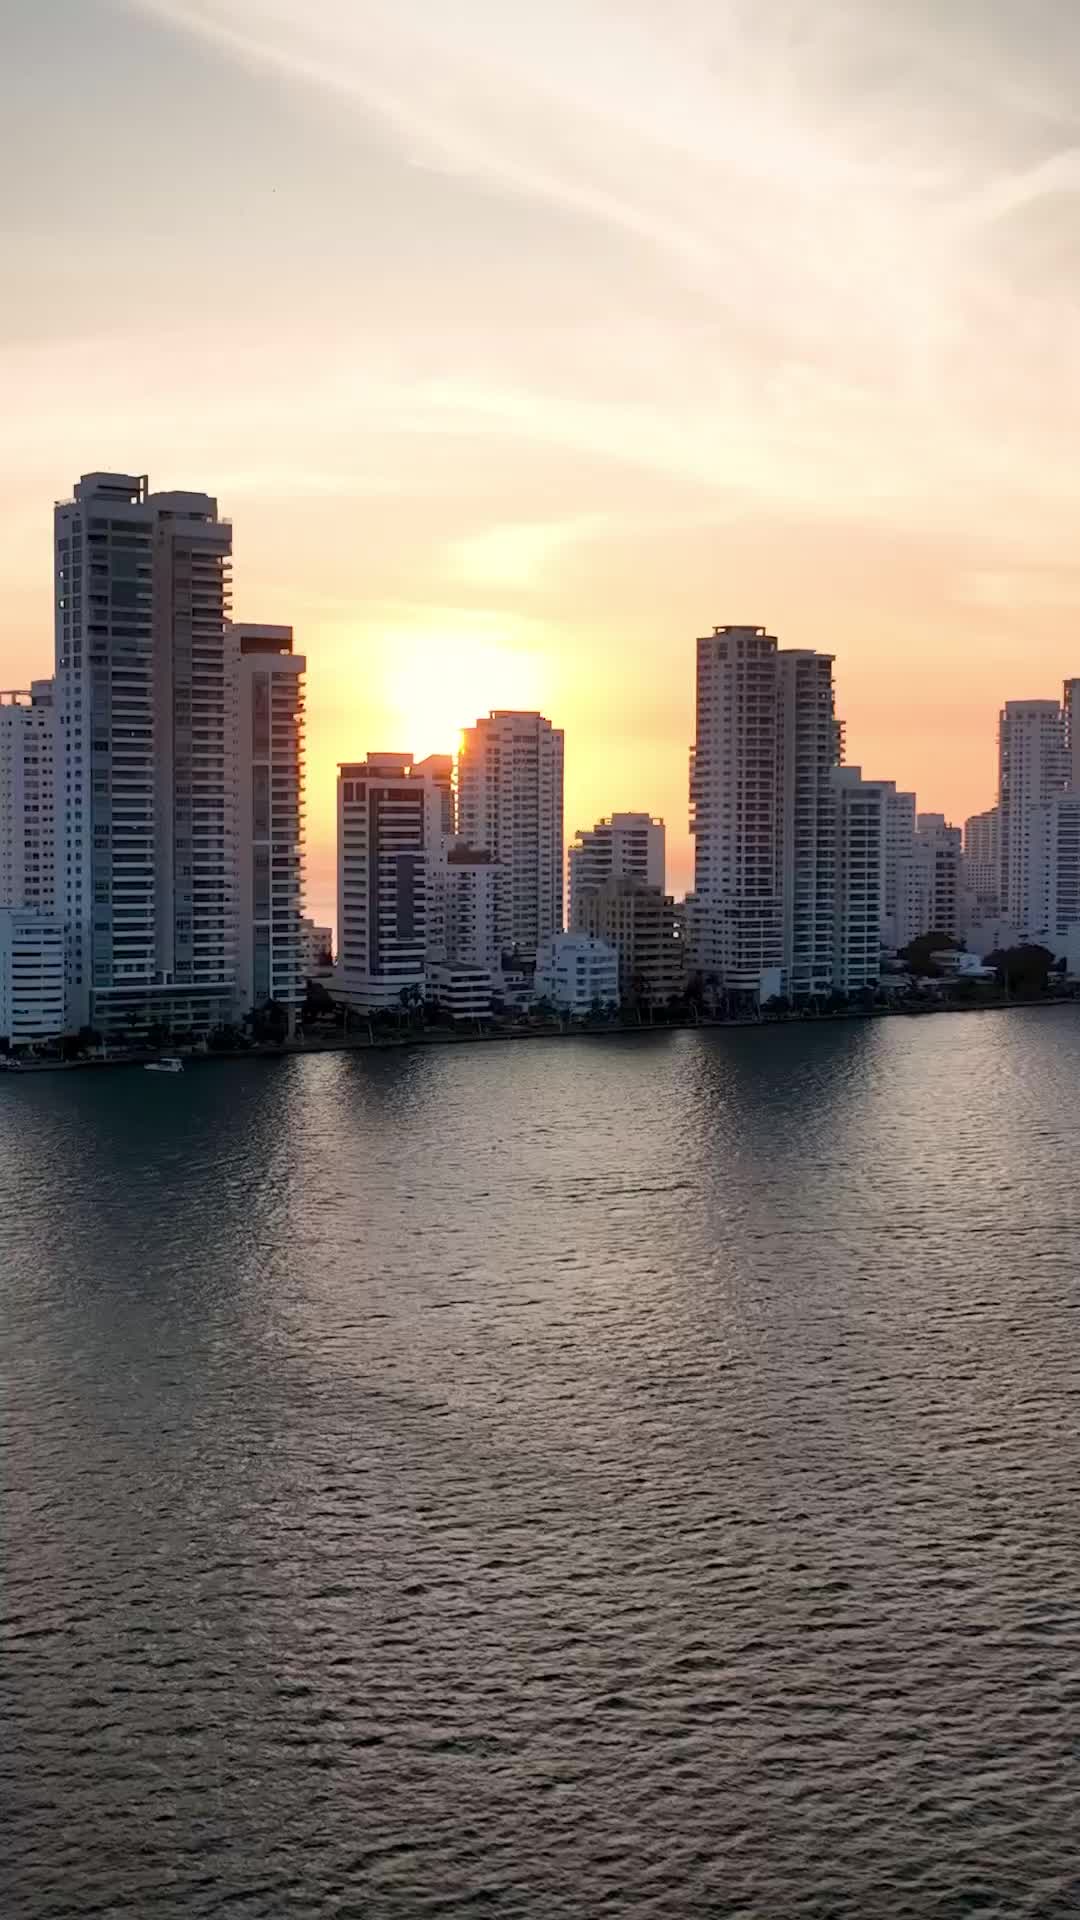 Sunset Cruise in Cartagena, Colombia